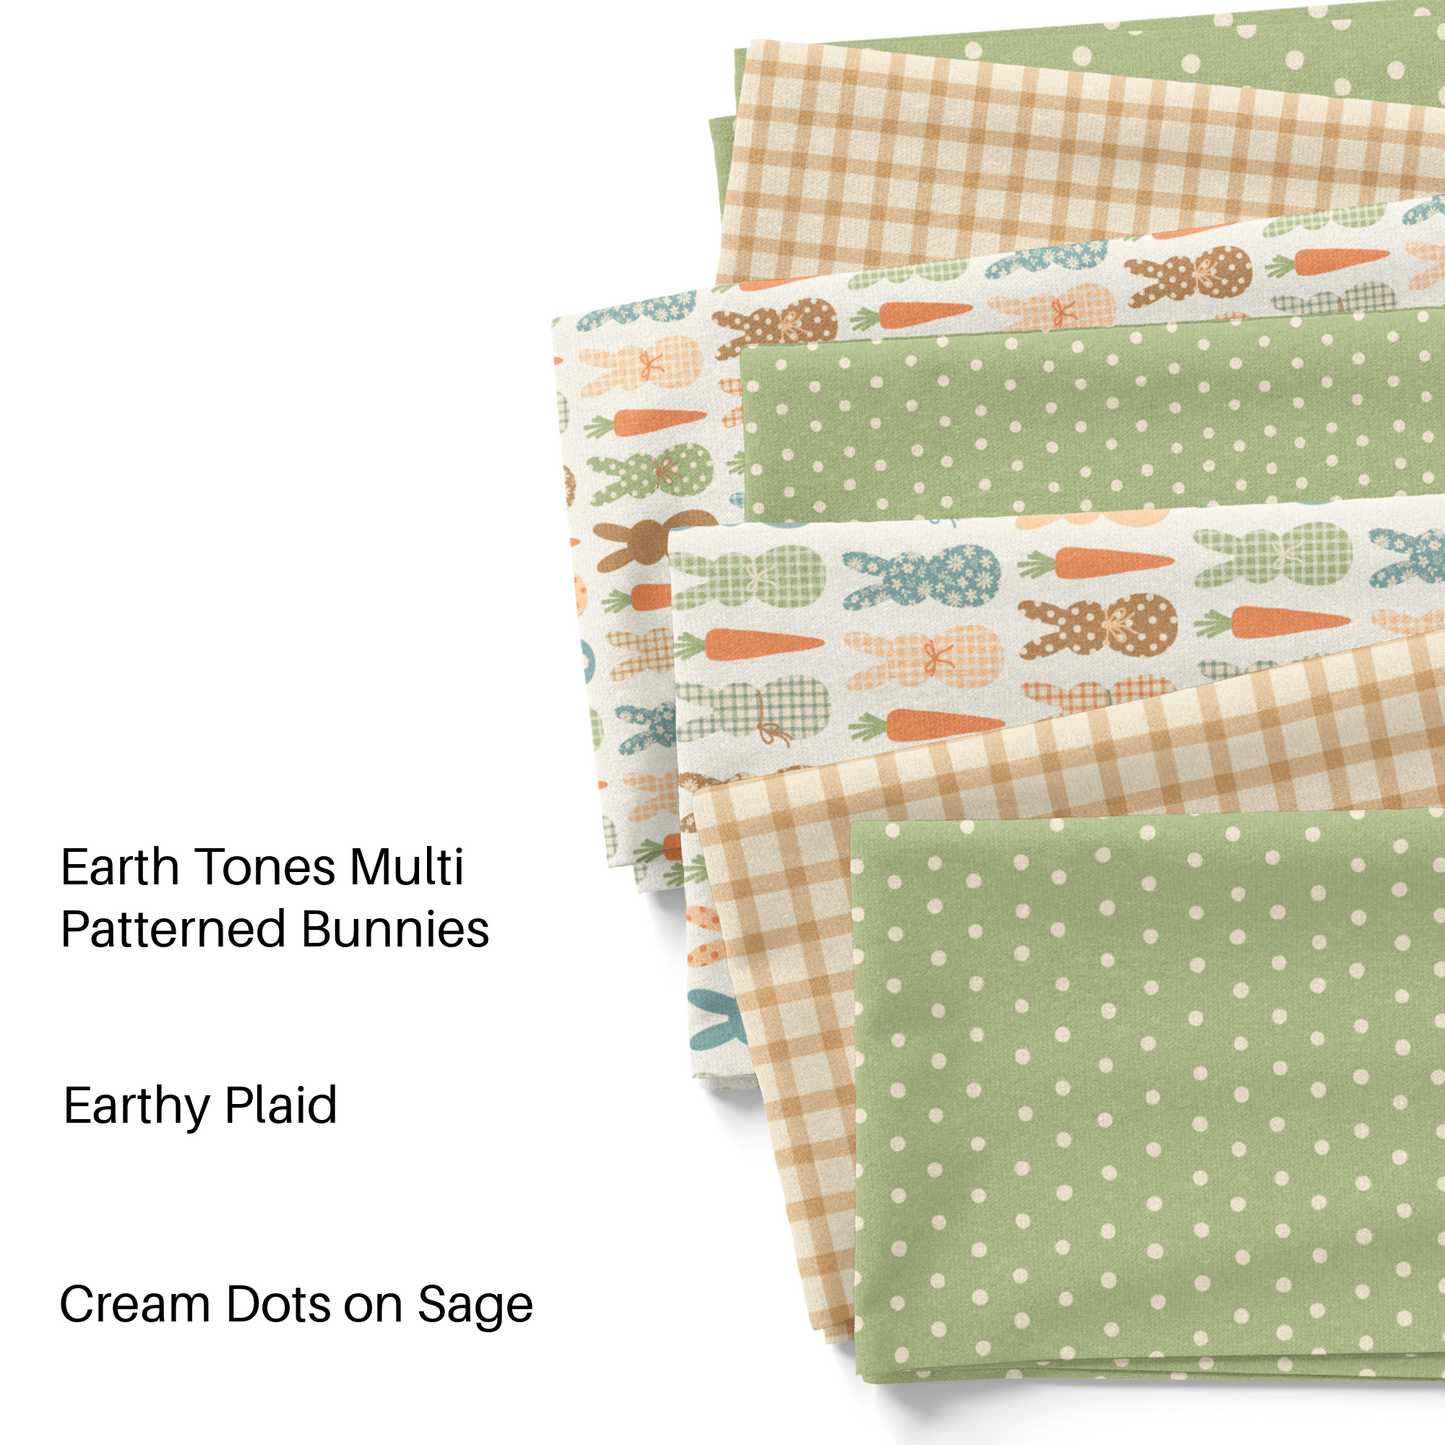 Earth Toned Multi Patterned Bunnies Fabric By The Yard